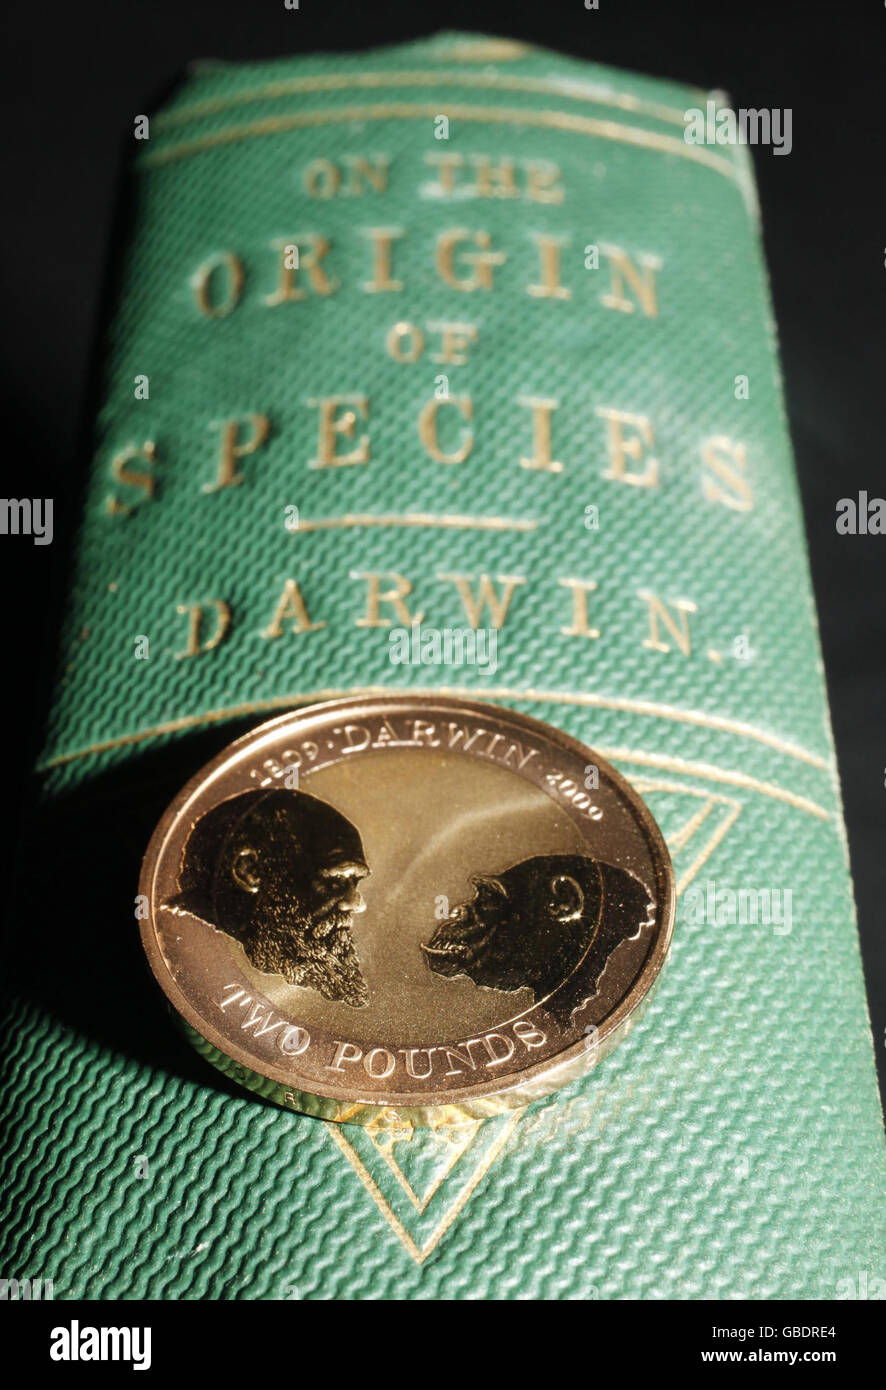 The Royal Mint's new special, collectable 2 coin on the spine of a first edition of Charles Darwin's 'On The Origin Of The Species' in the Rare Books Room at the Natural History Museum in London, which launches today to commemorate the 200th anniversary of his birth. Stock Photo